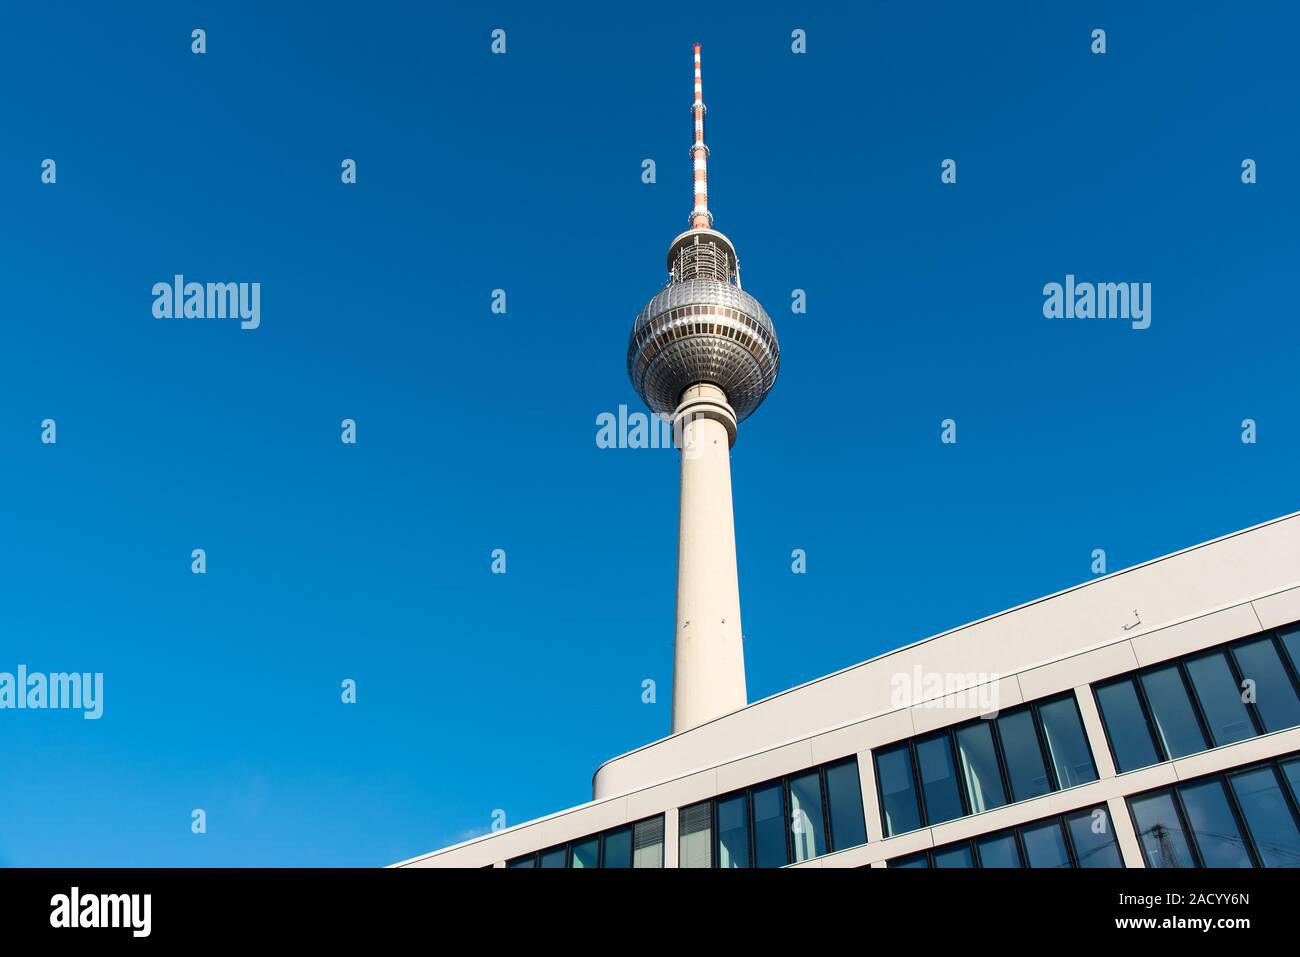 The famous TV Tower and a modern building in Berlin, Germany Stock Photo